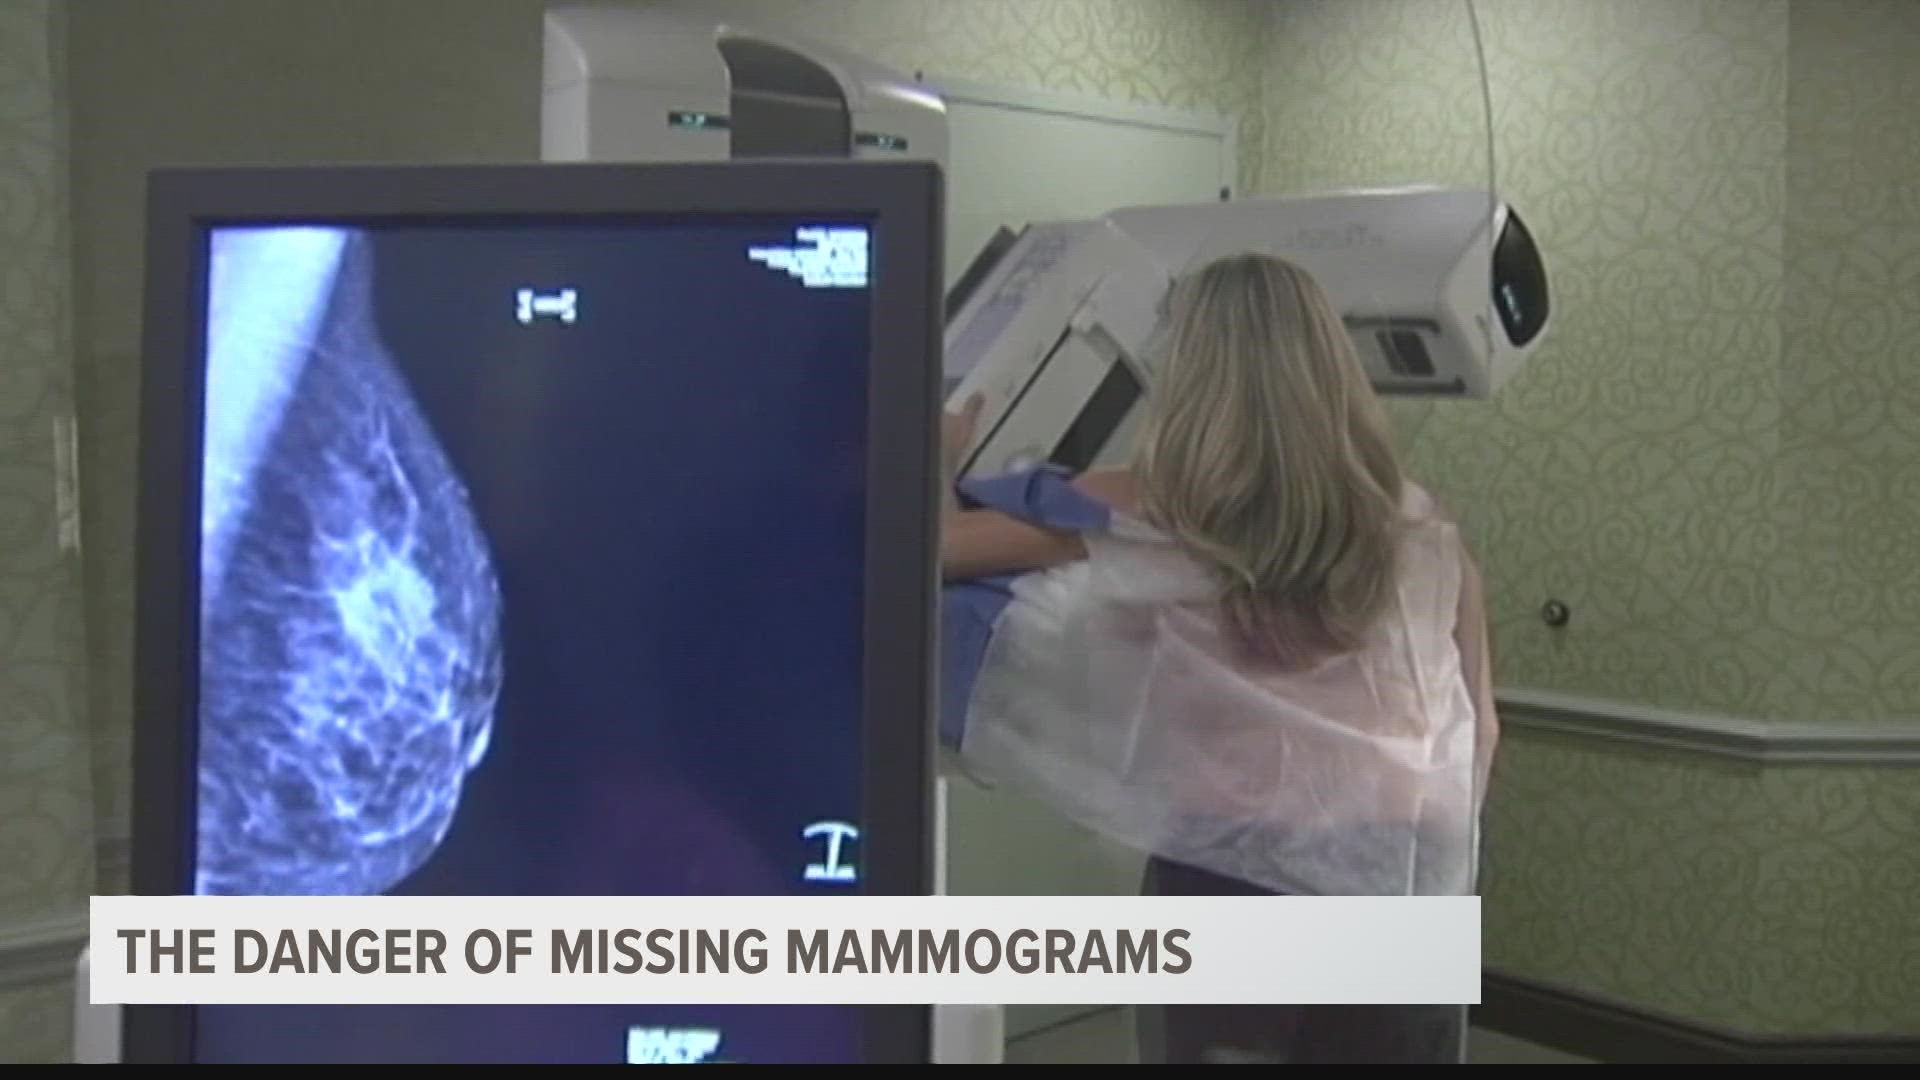 There has been a drastic drop in the number of breast cancer screenings since the start of the pandemic, which is concerning because early detection is key.